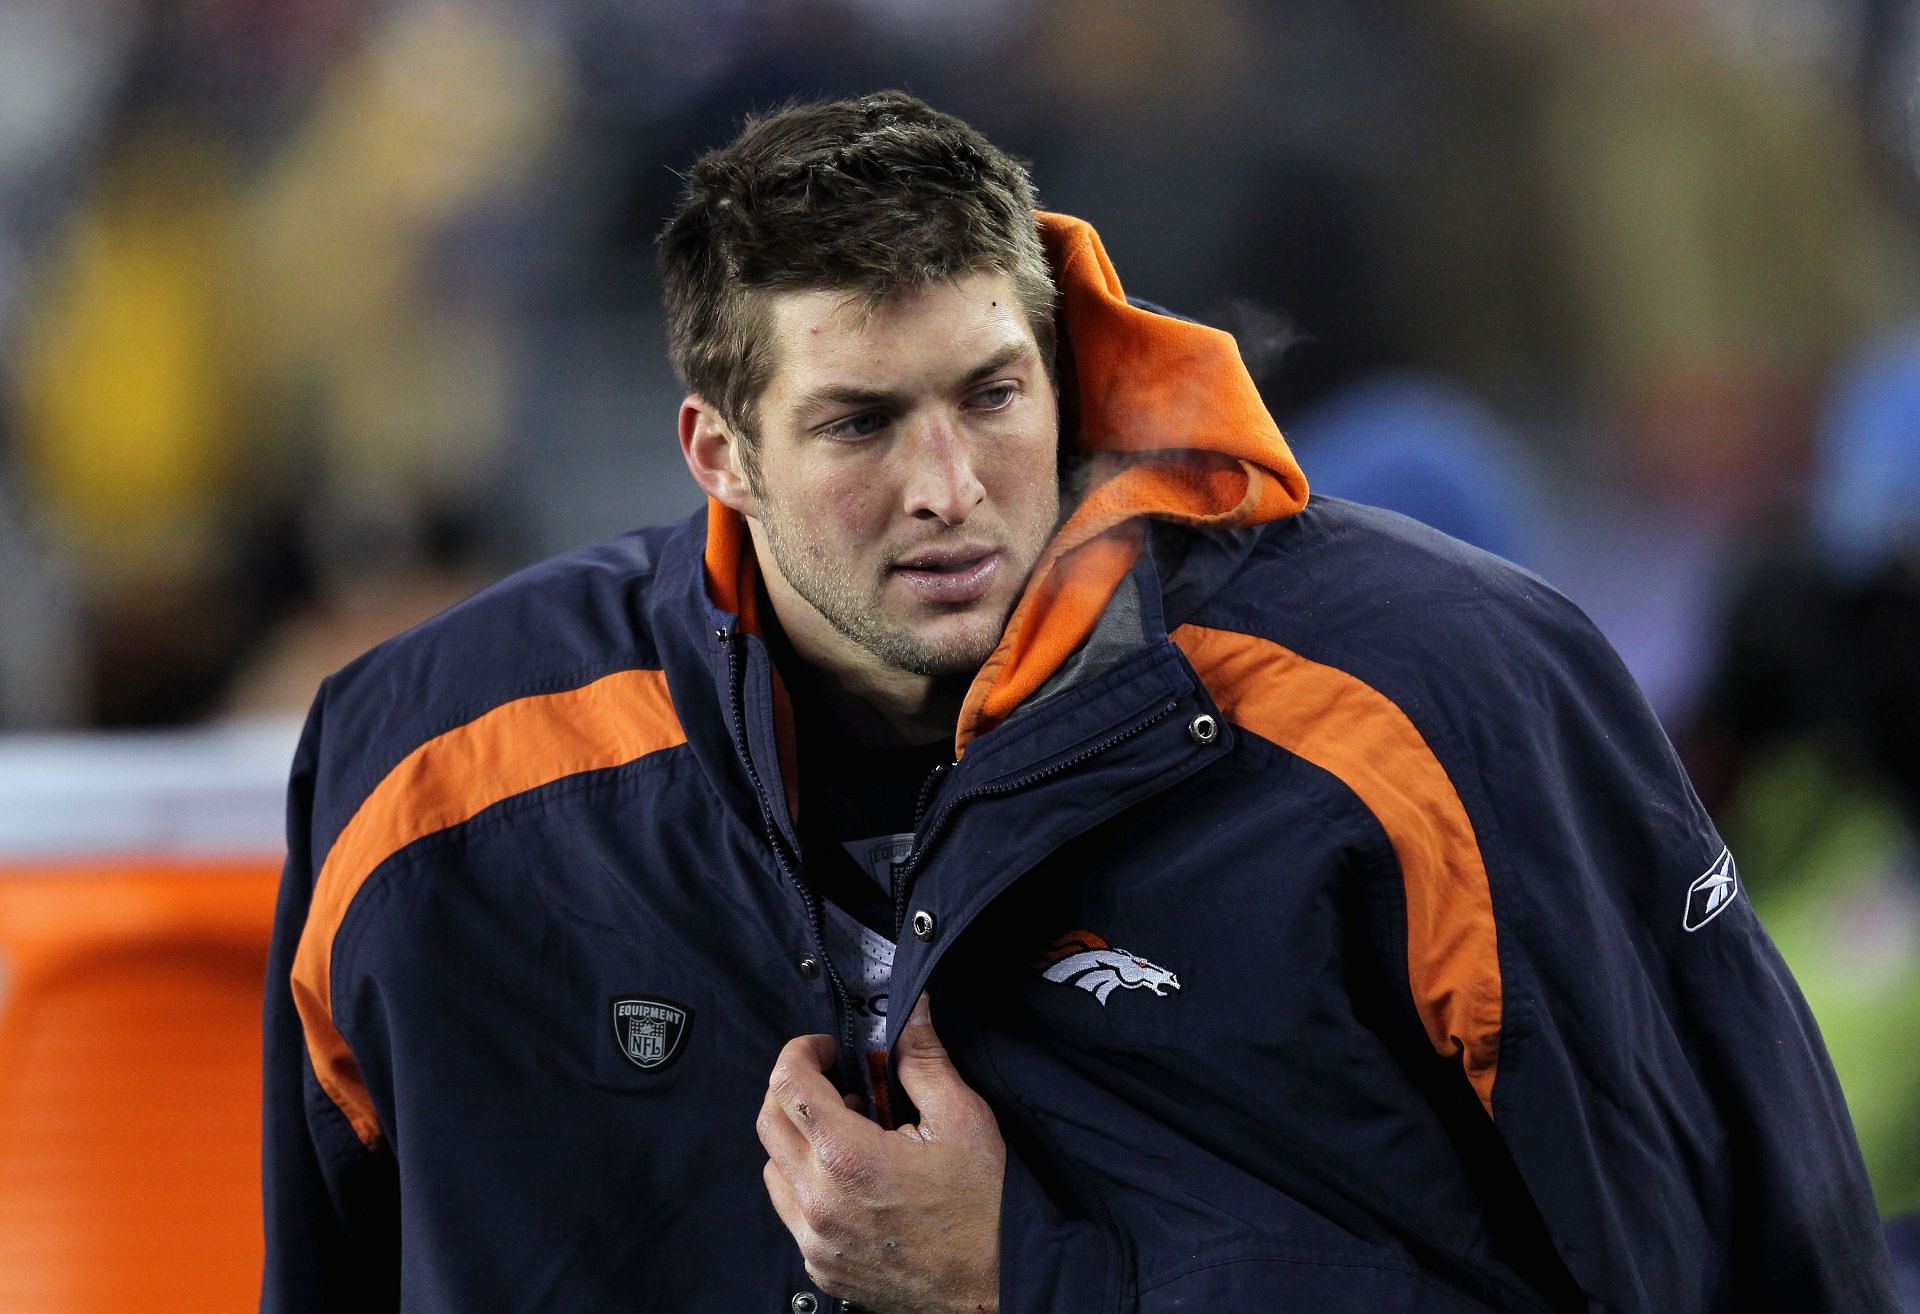 Kleiman] On this day, 9 years ago, #Broncos QB Tim Tebow pulled